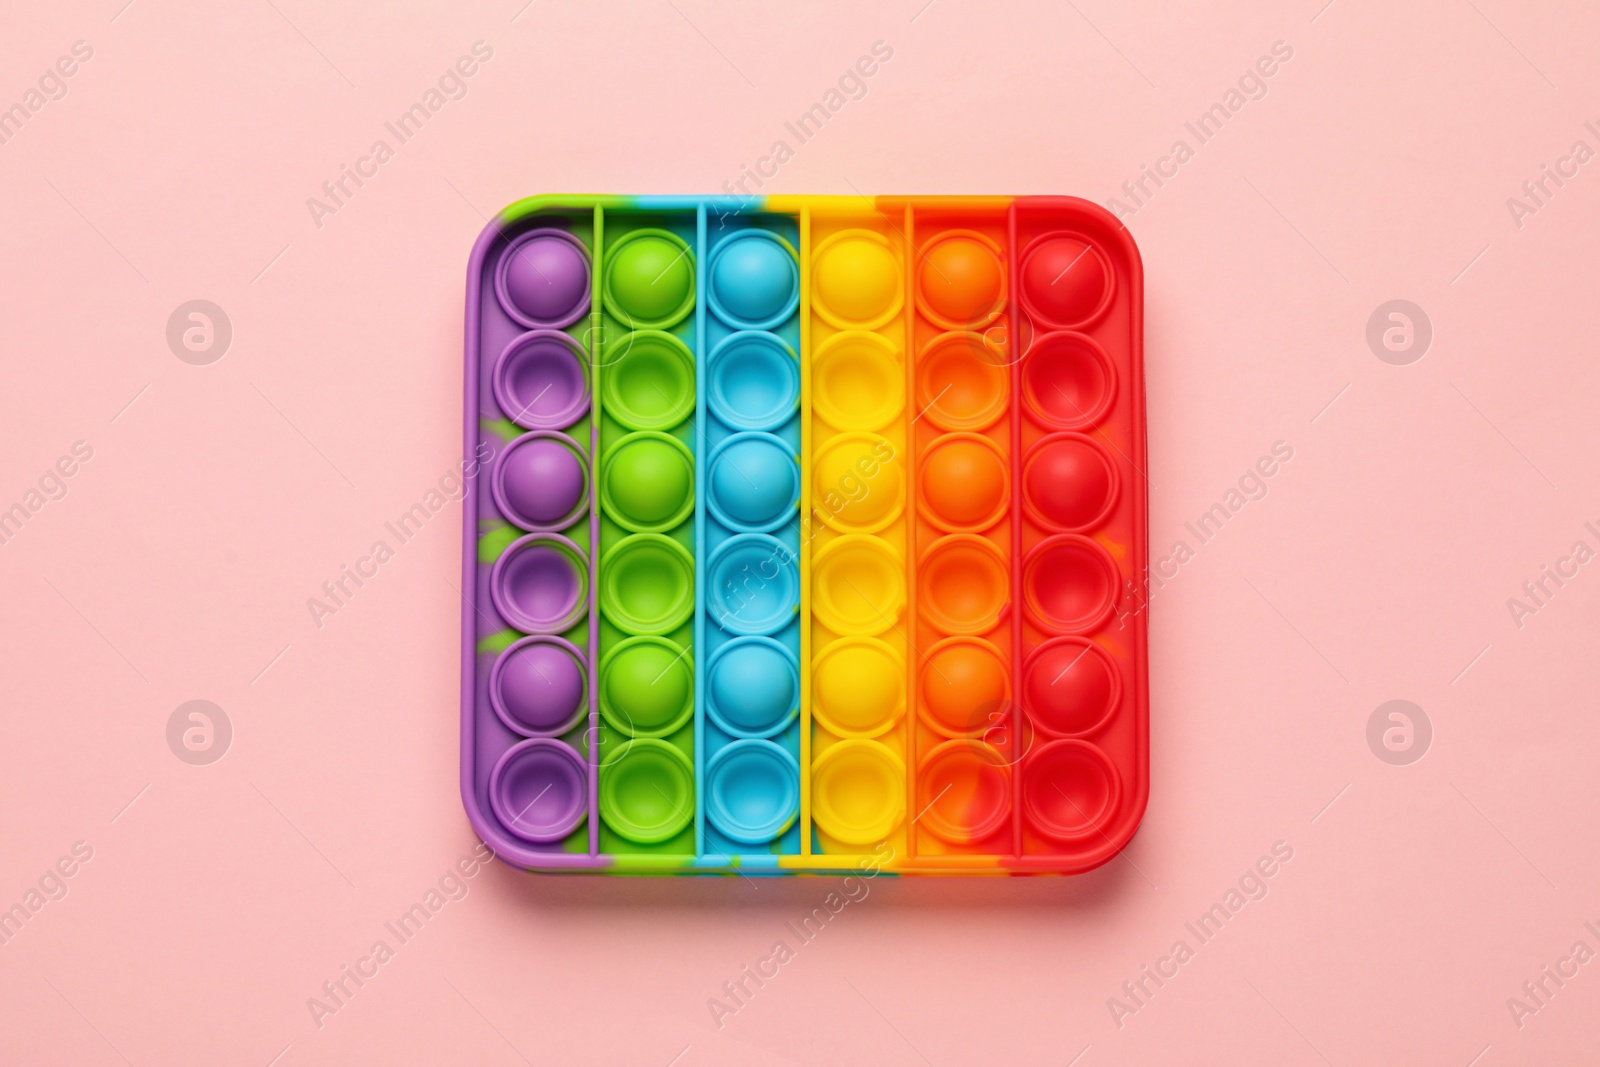 Photo of Rainbow pop it fidget toy on pink background, top view